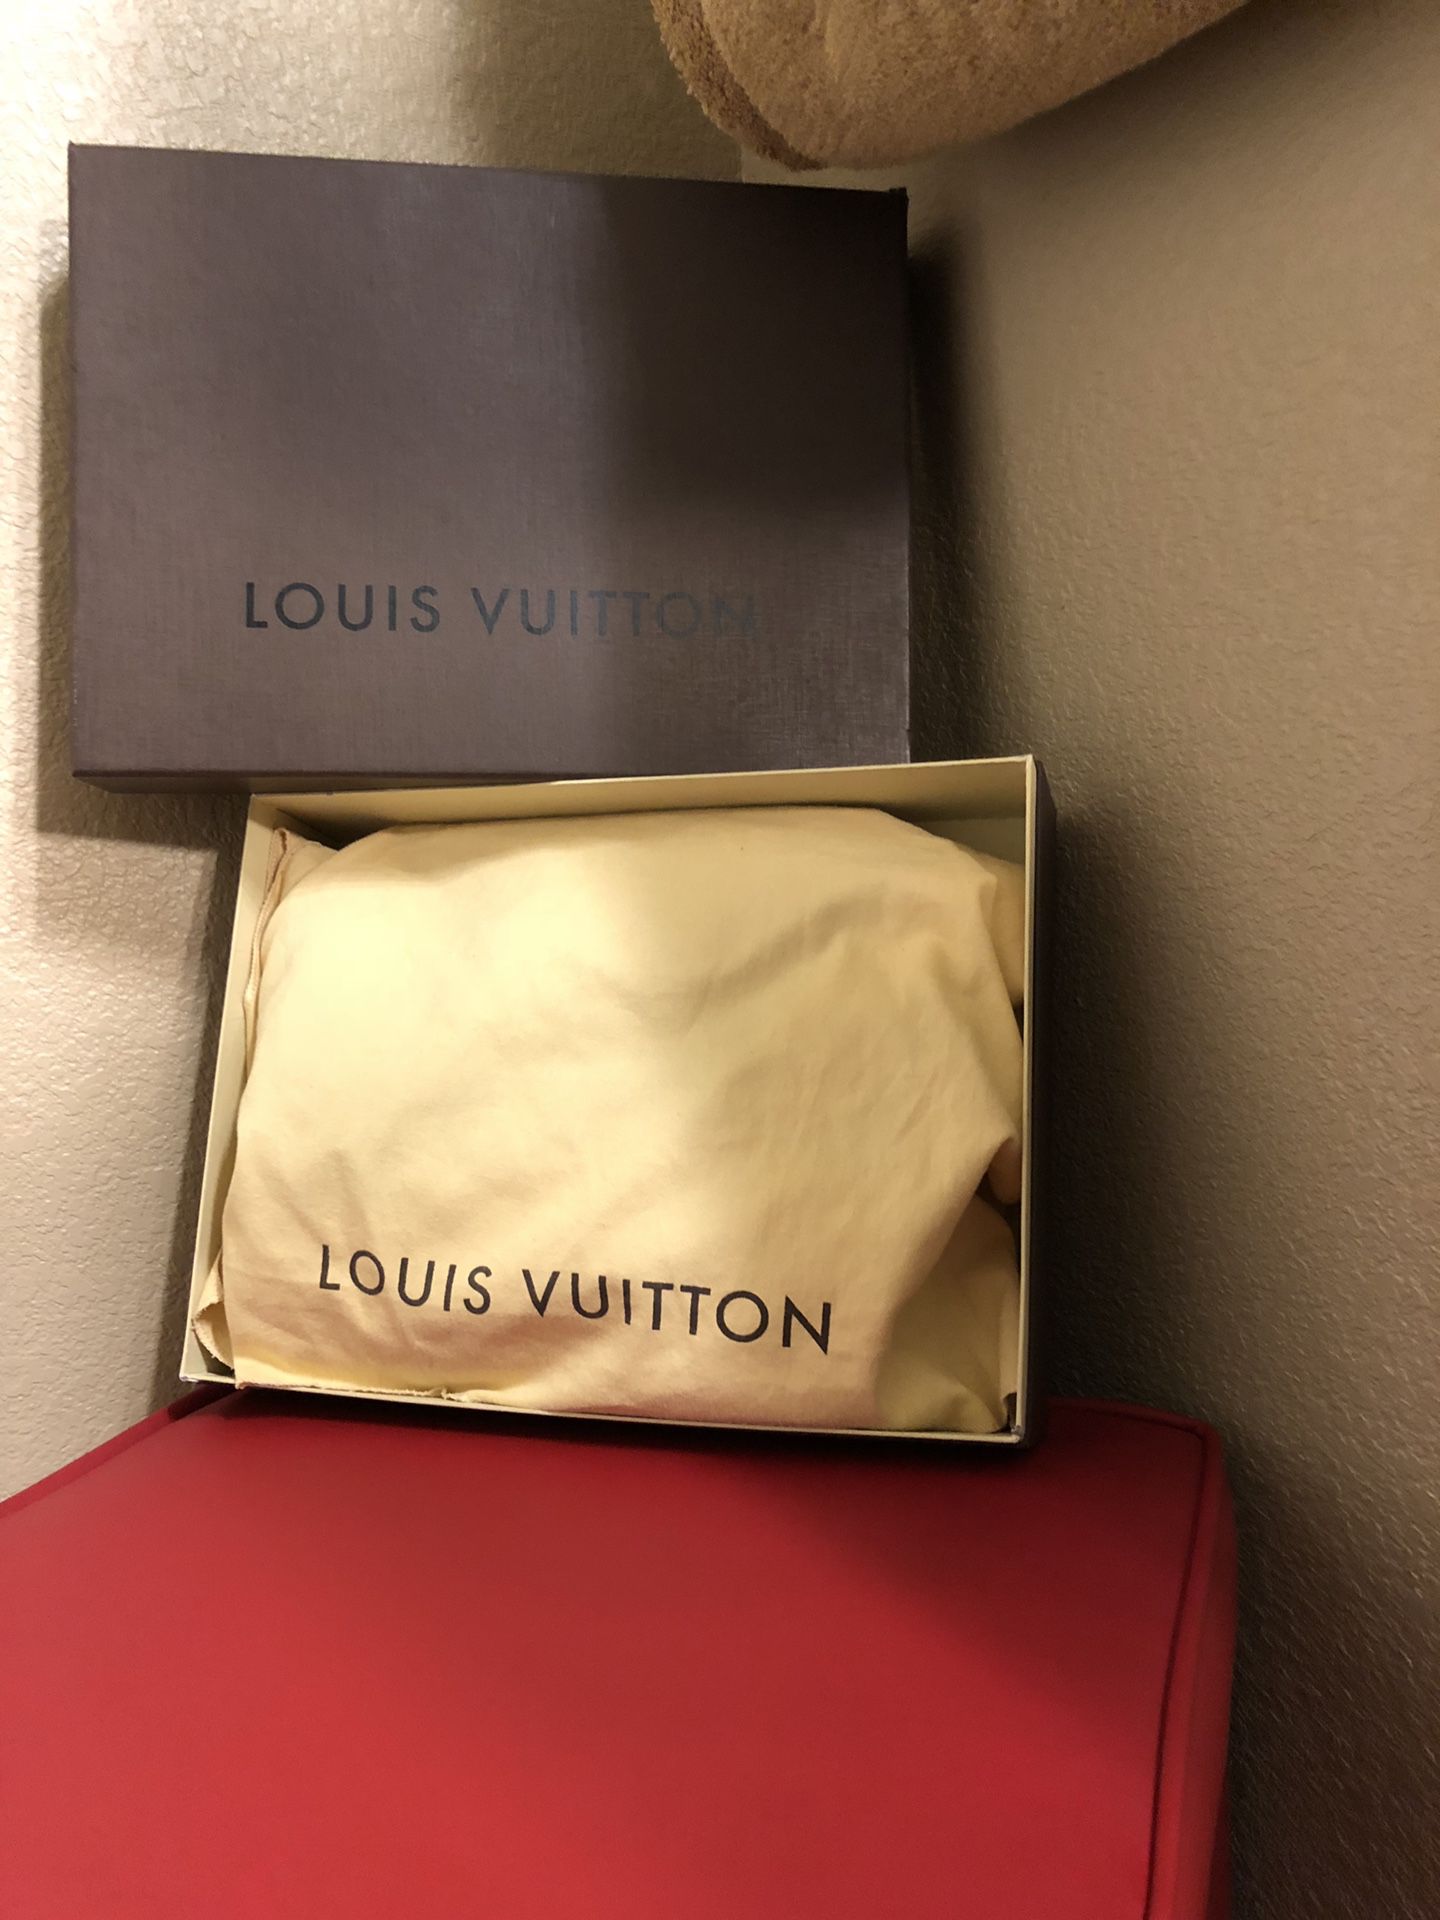 Authentic Louis Vuitton crossbody not used everyday. Comes with box and protective bag. No low balling please. Meet at Round Rock outlet only